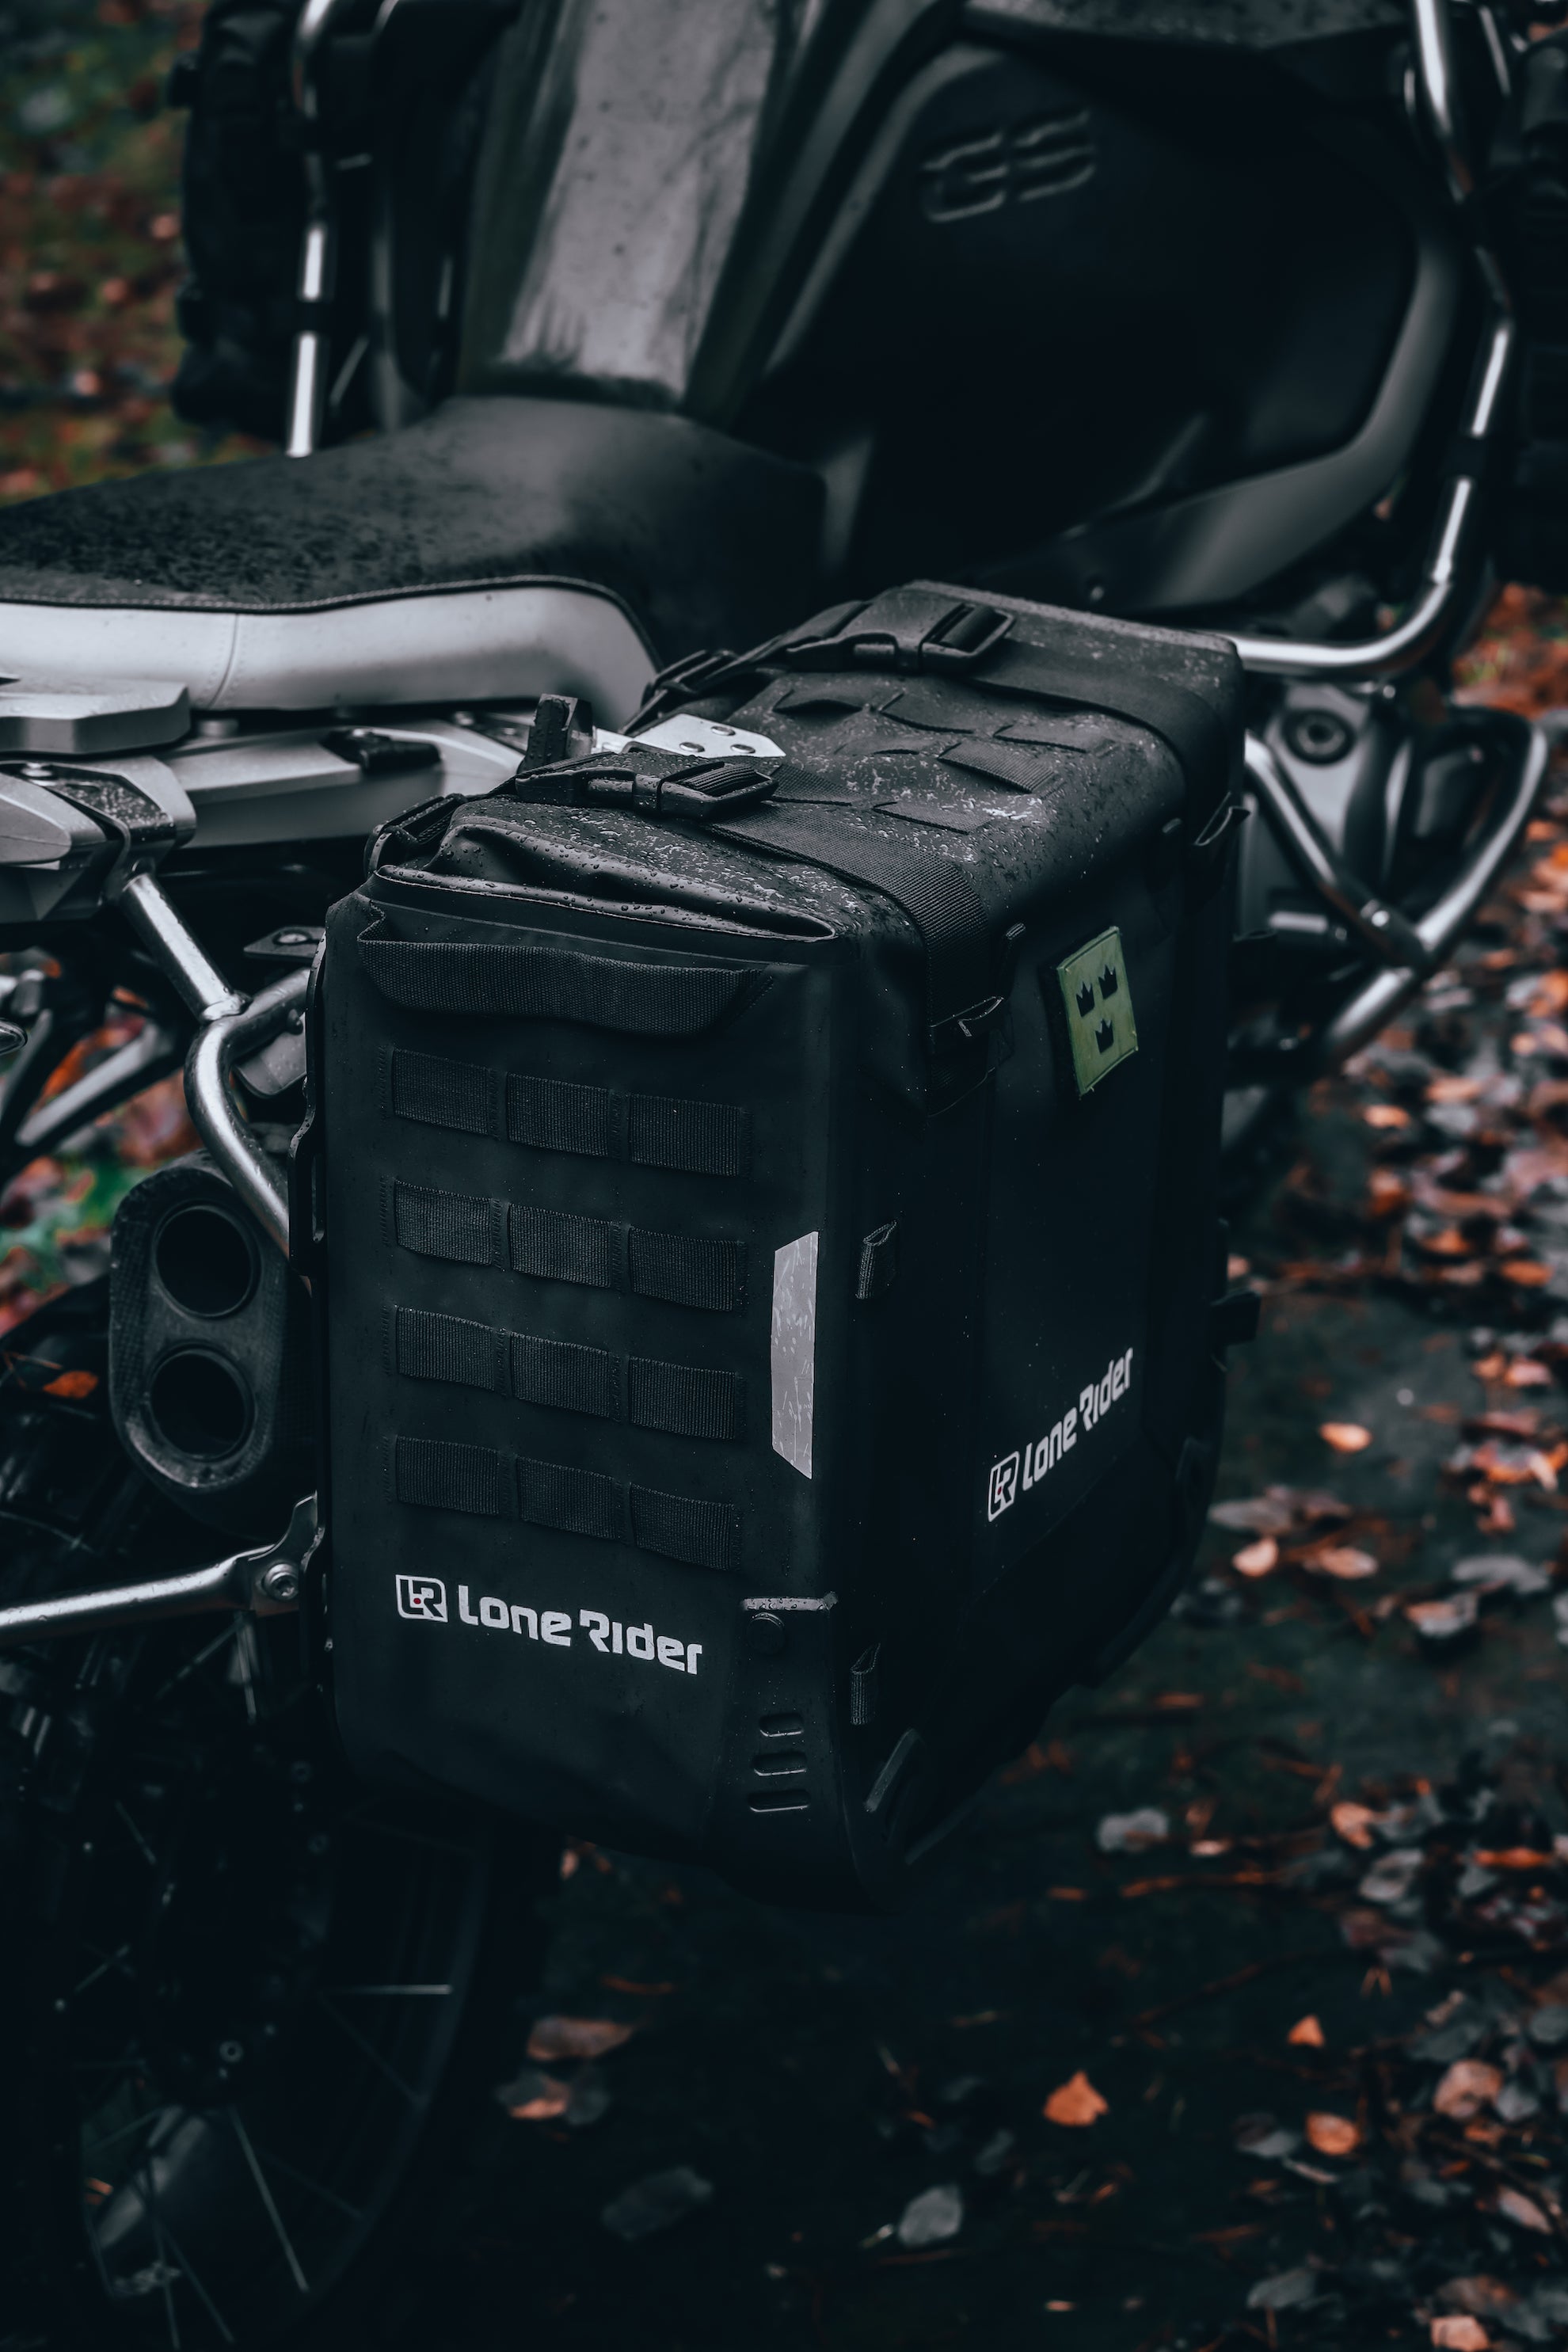 Packing properly for rain with Lone Rider MotoBags